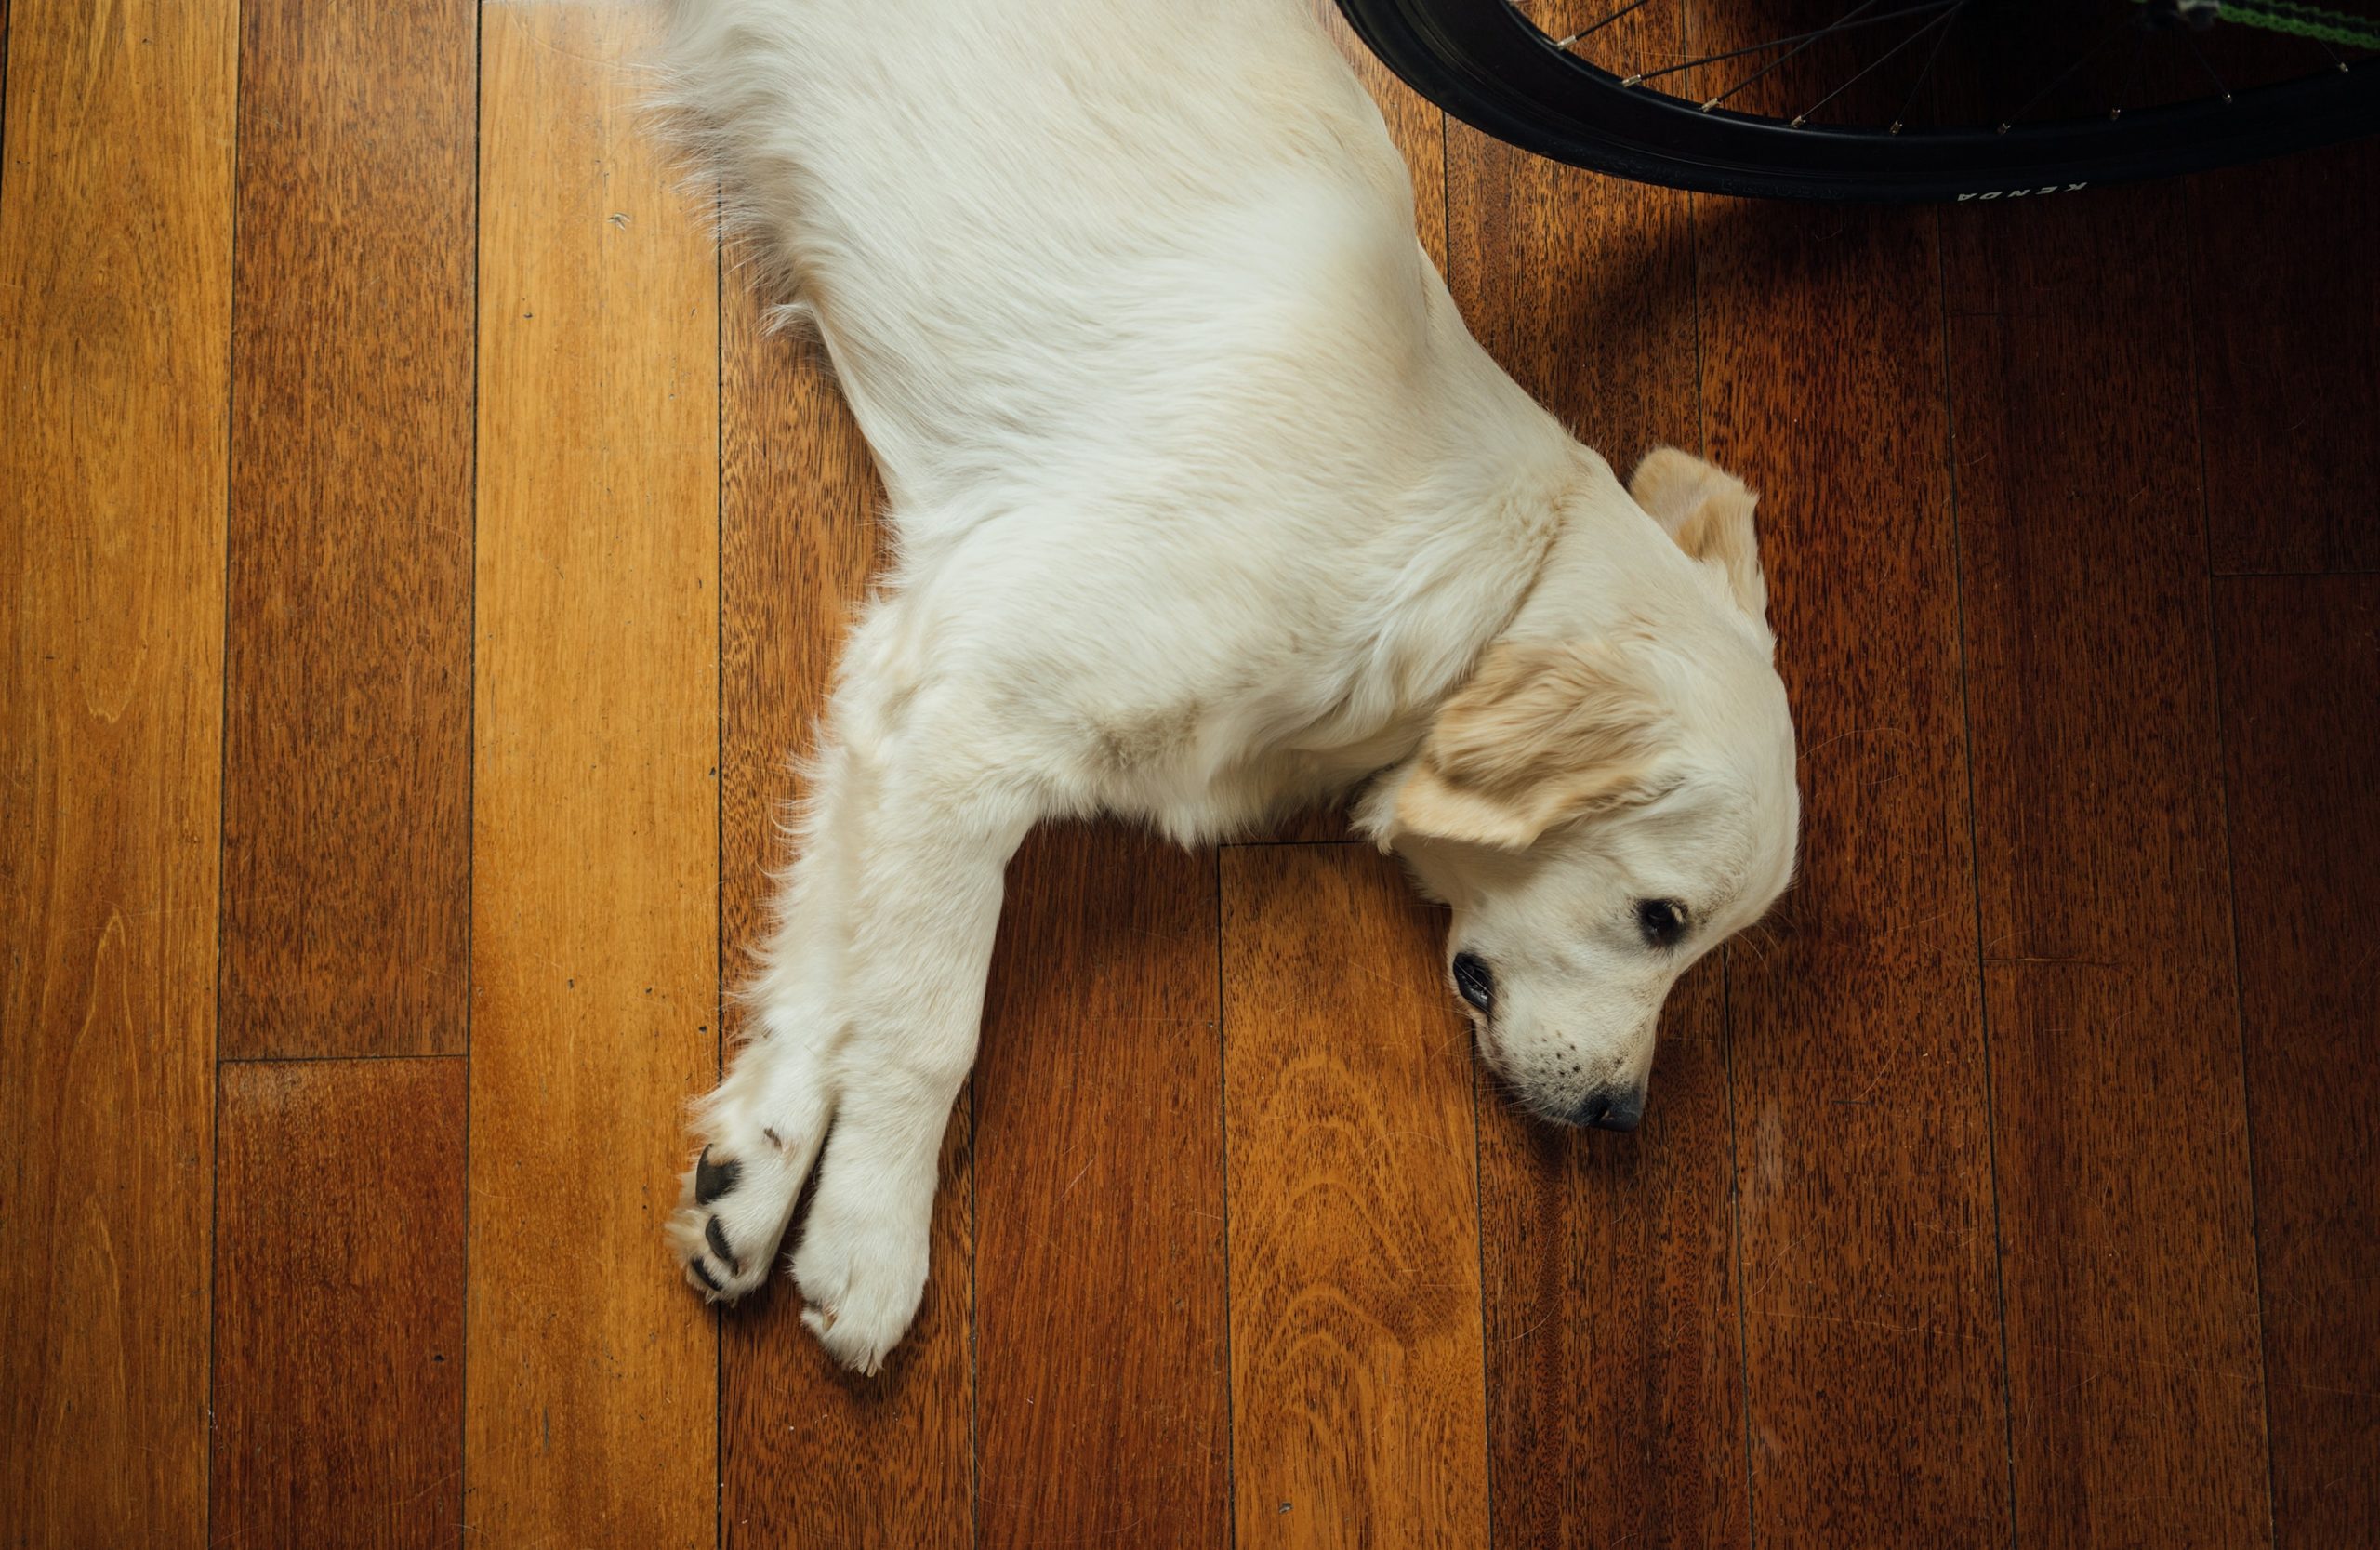 Best Wooden Floor For Cats And Dogs, Engineered Hardwood Floors And Dogs